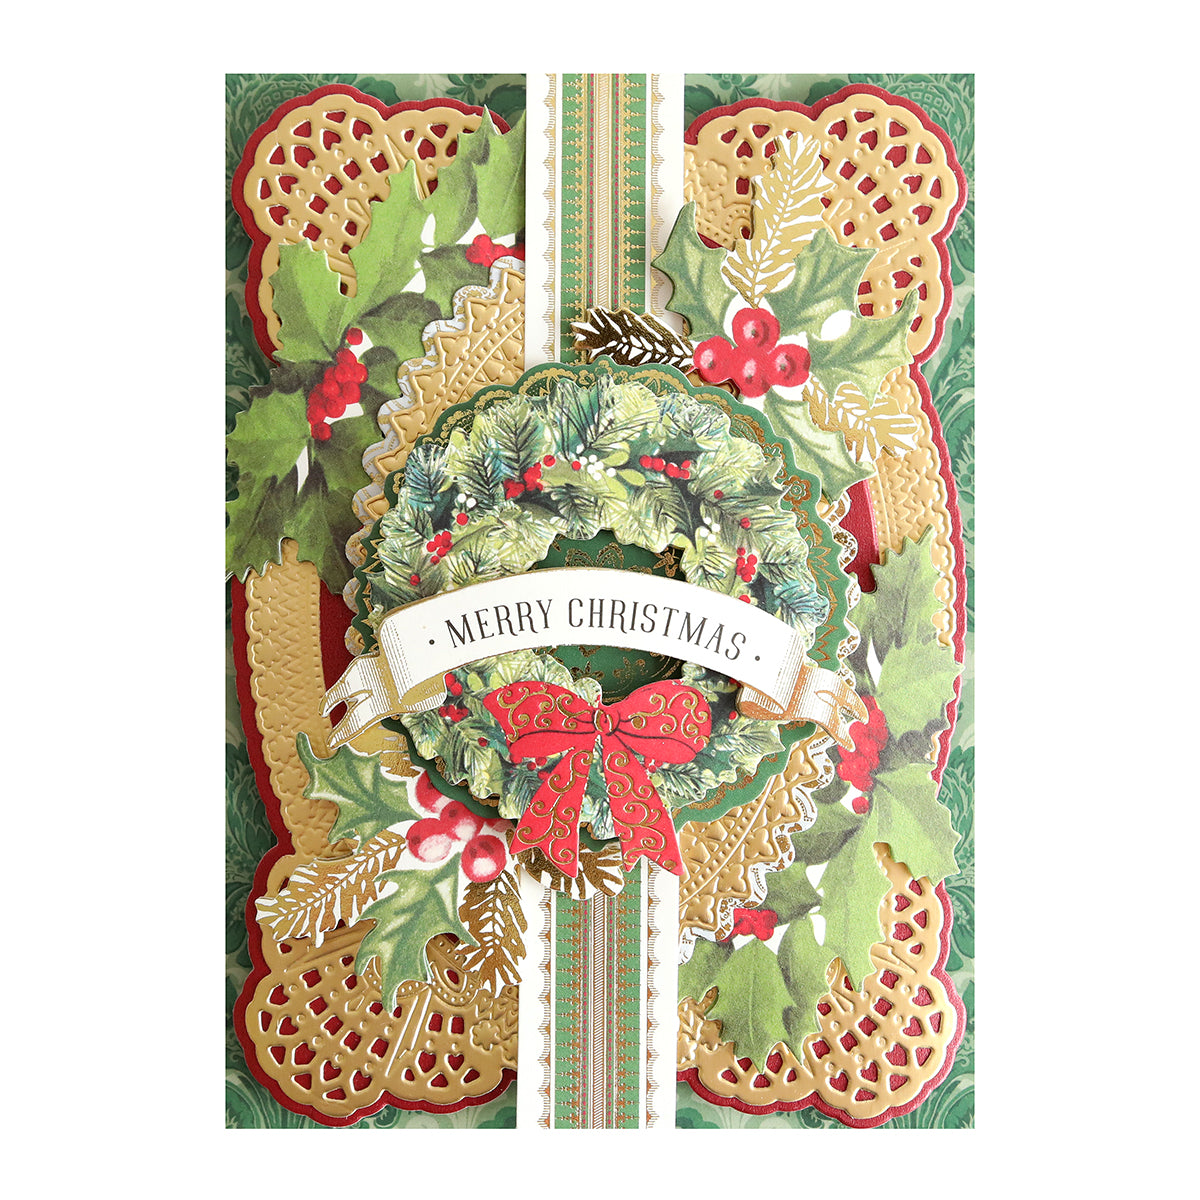 A seasonal craft project featuring a christmas card adorned with the Retro Holly Sticker Library and berries.